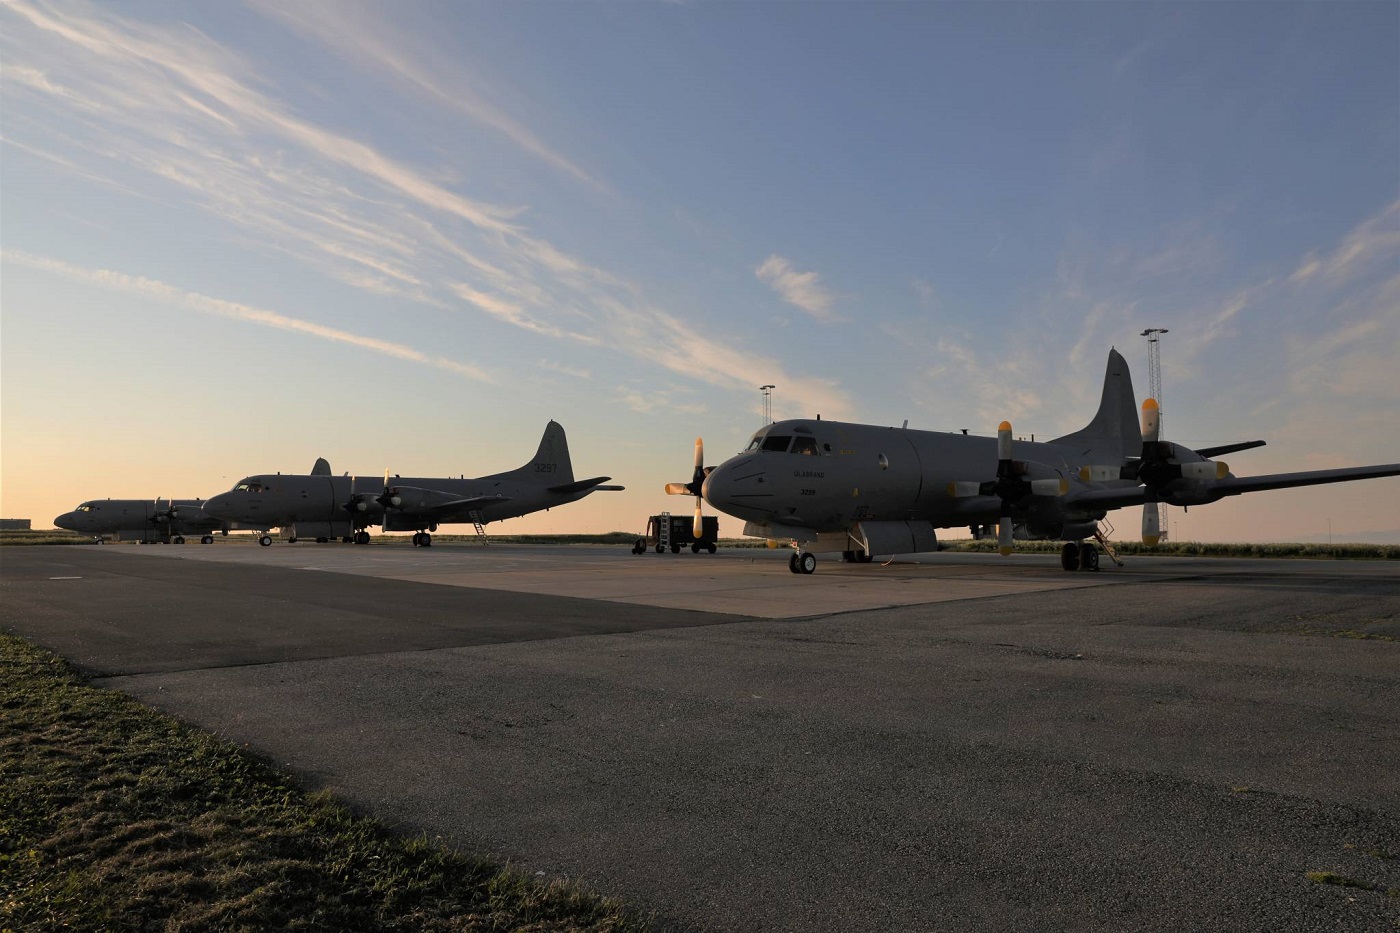 Lockheed P-3C Orion maritime patrol aircraft recently retired by Royal Norwegian Air Force